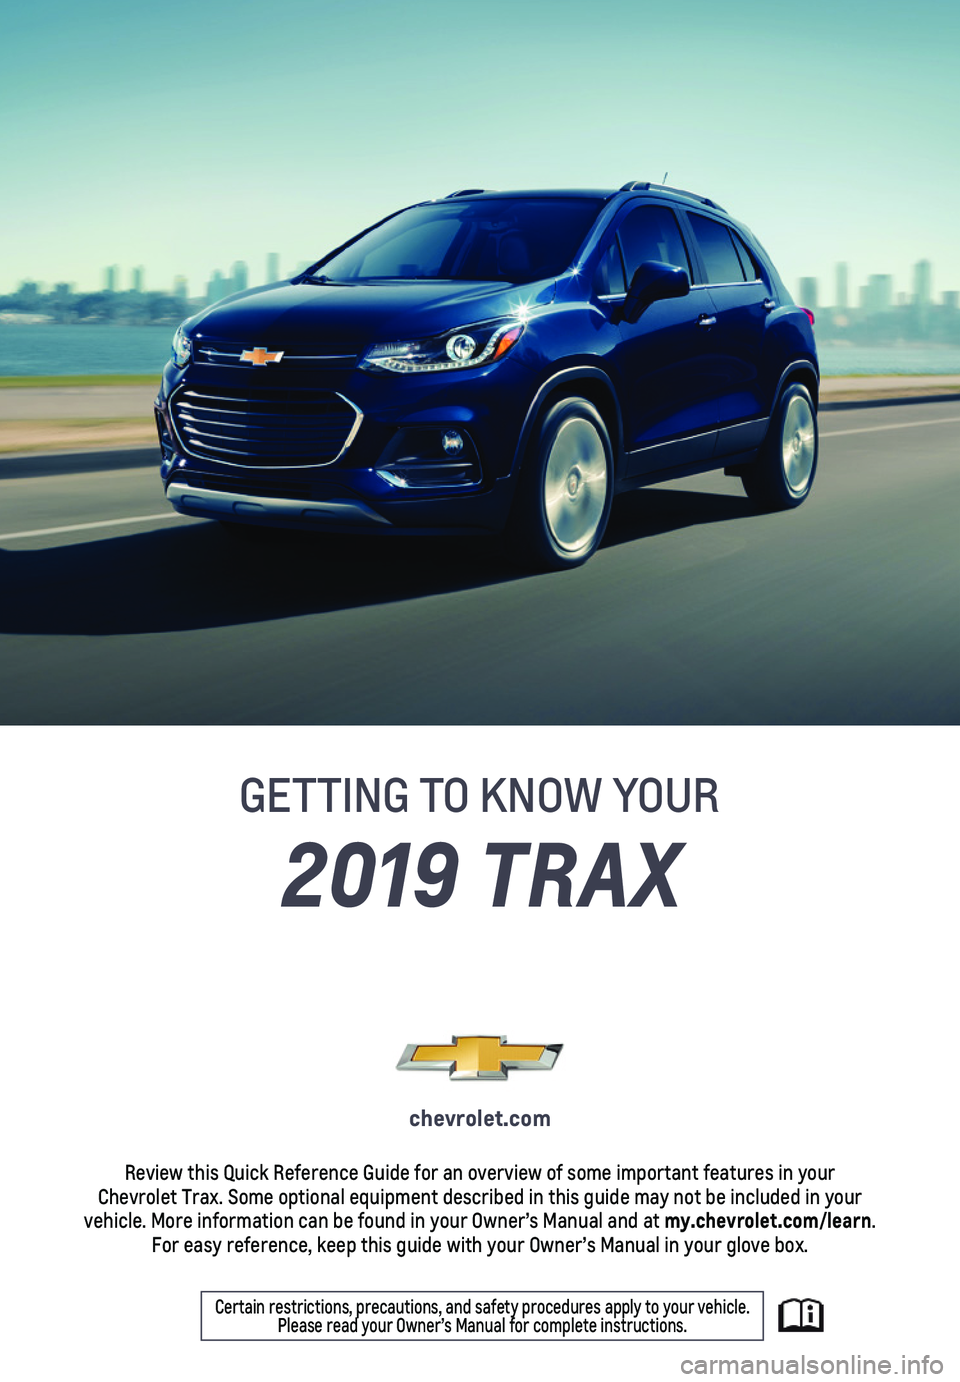 CHEVROLET TRAX 2019  Get To Know Guide 1
2019 TRAX
GETTING TO KNOW YOUR
chevrolet.com
Review this Quick Reference Guide for an overview of some important feat\
ures in your  Chevrolet Trax. Some optional equipment described in this guide m